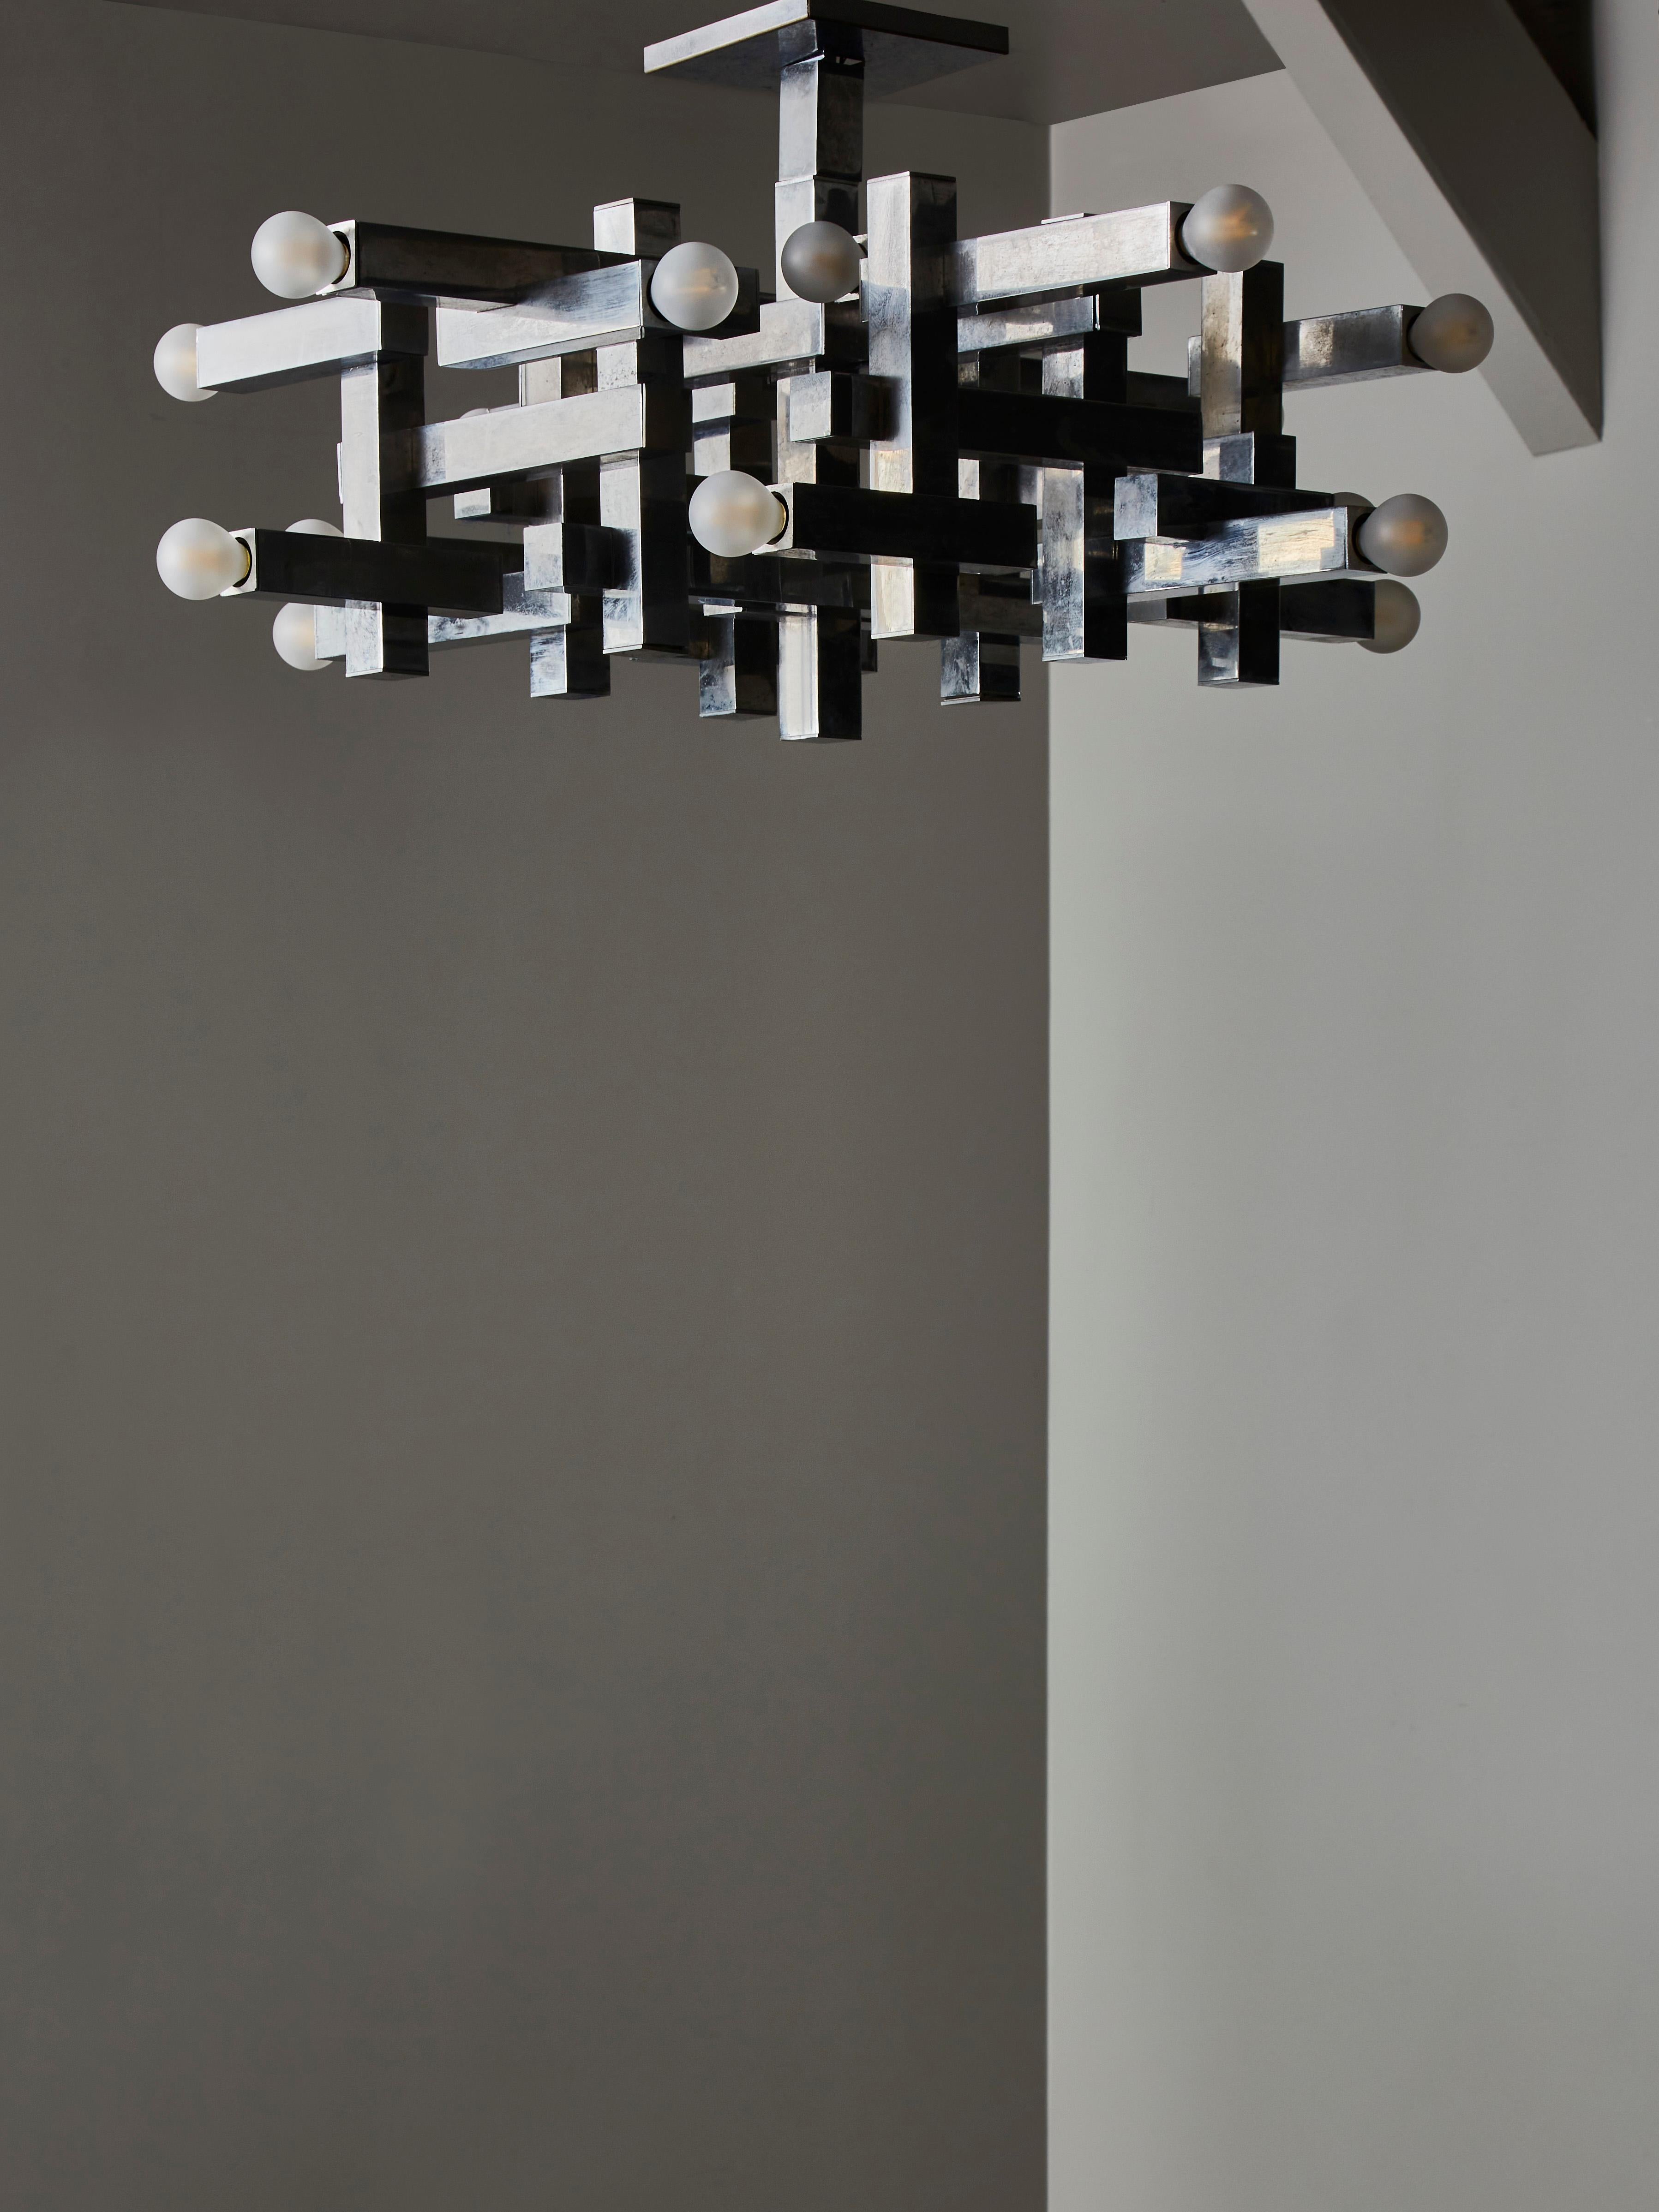 Cubist chandelier by Gaetano Sciolari made of square tubes geometrically assembled.

Original sticker in the canopy.